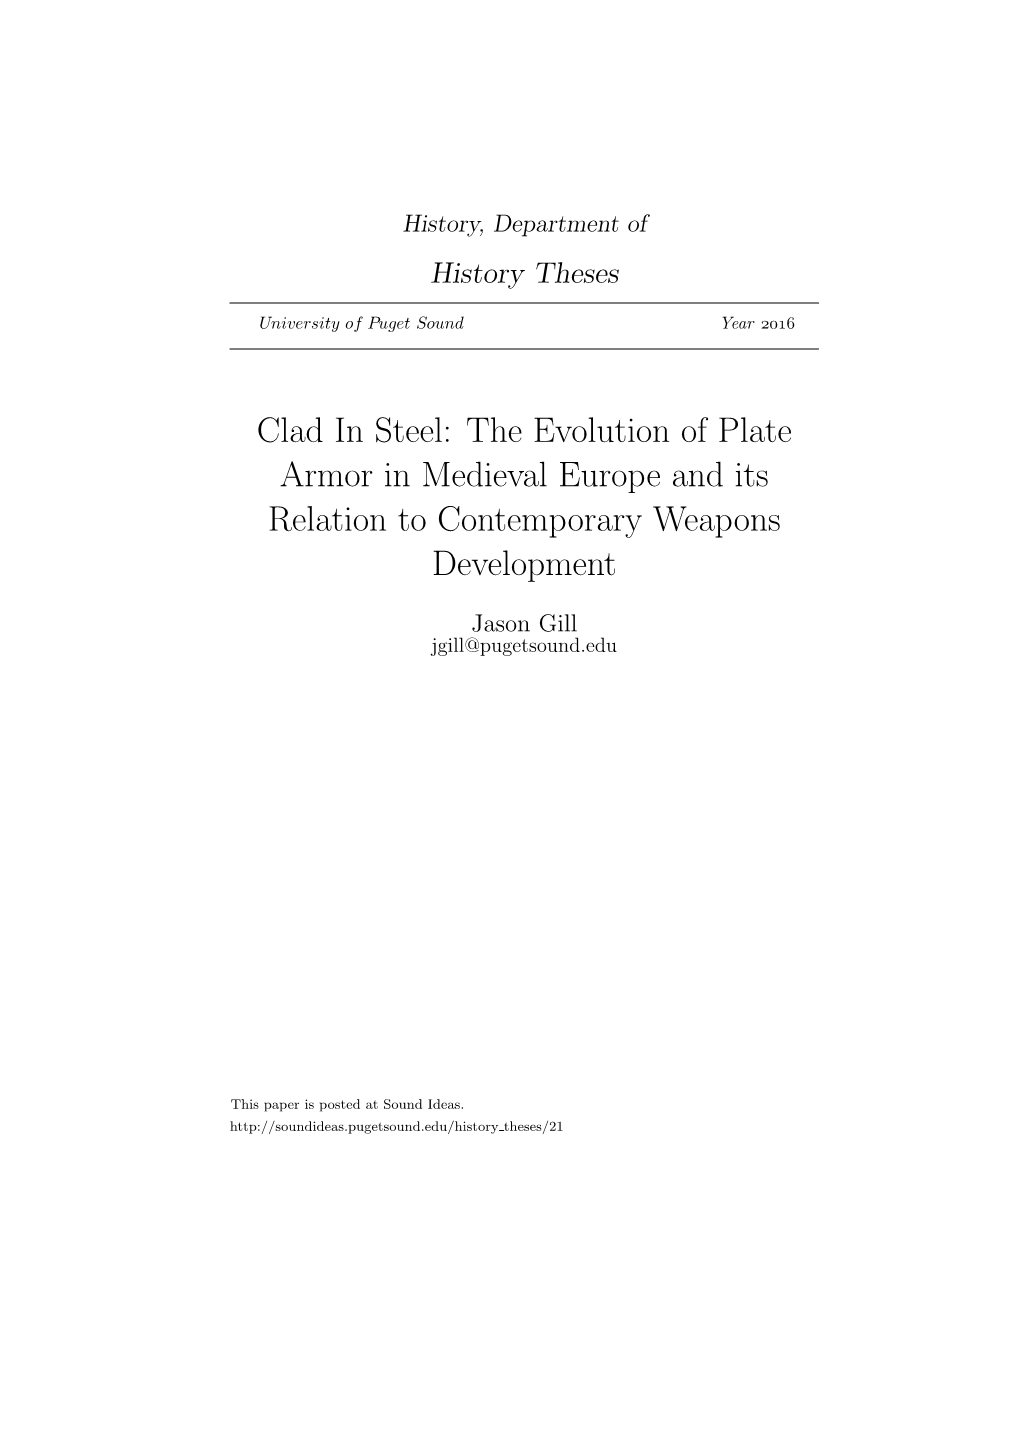 The Evolution of Plate Armor in Medieval Europe and Its Relation to Contemporary Weapons Development